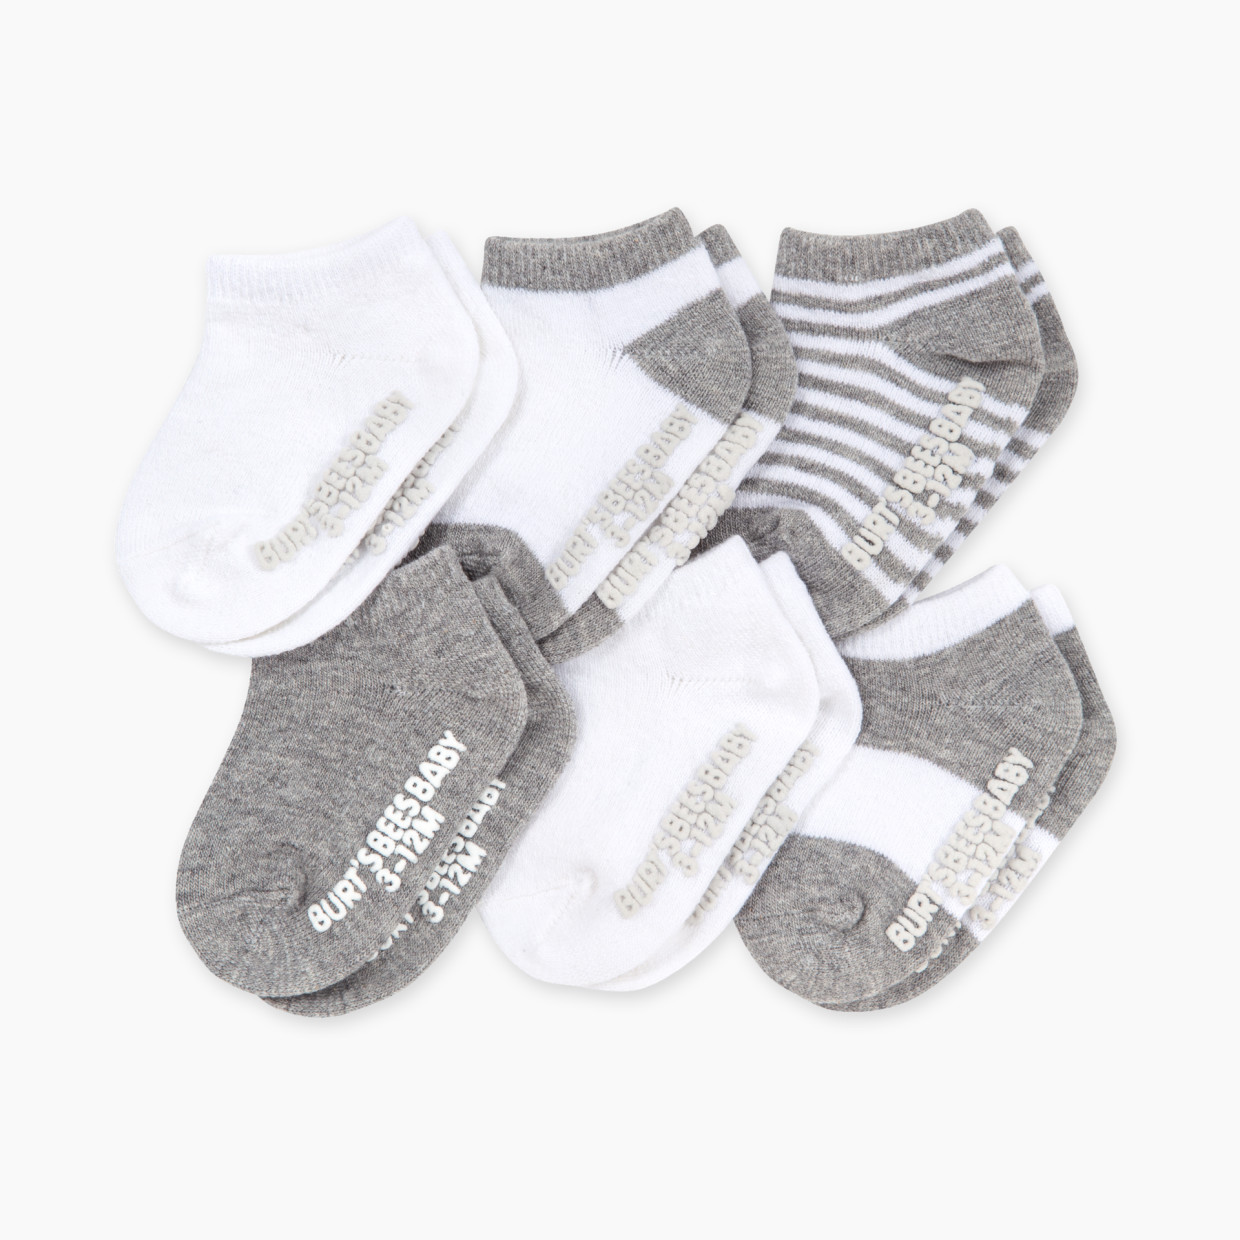 Burt's Bees Baby Ankle Socks (6 Pack) - Heather Grey Pattern, 0-3 Months.